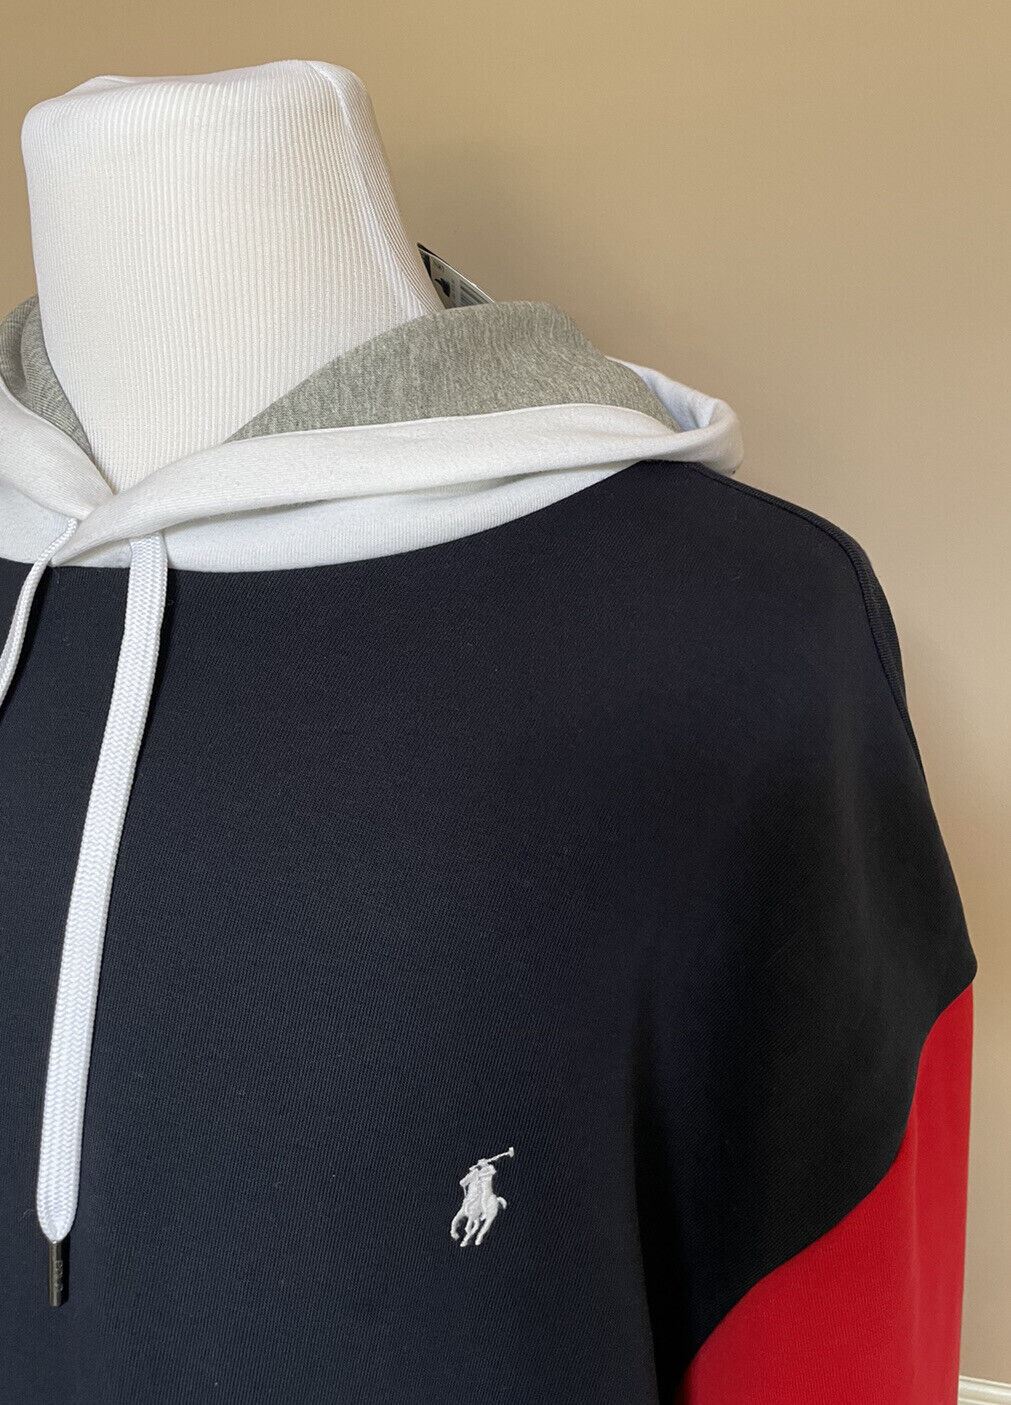 NWT $168 Polo Ralph Lauren Long Sleeve Sweater with Hoodie Navy 3XB/3TG